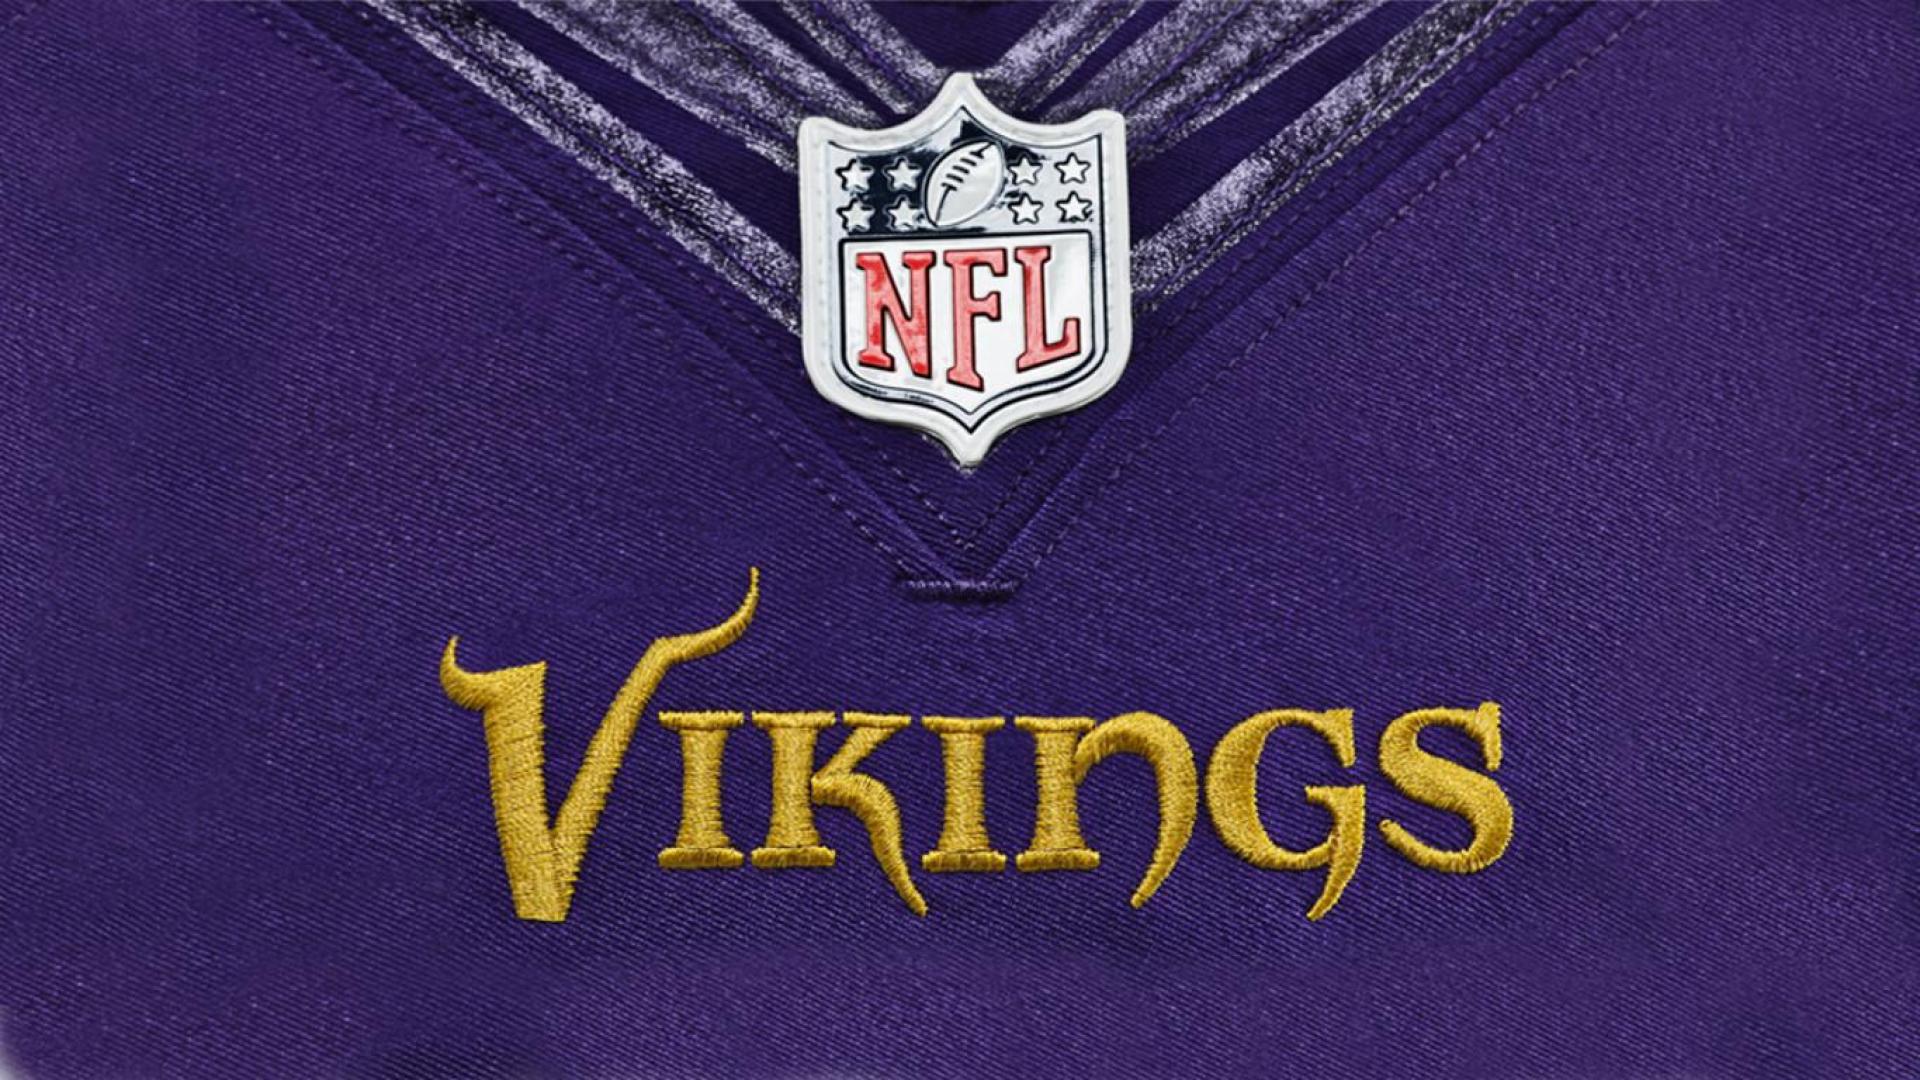 Vikings Jersey High Quality And Resolution Wallpaper